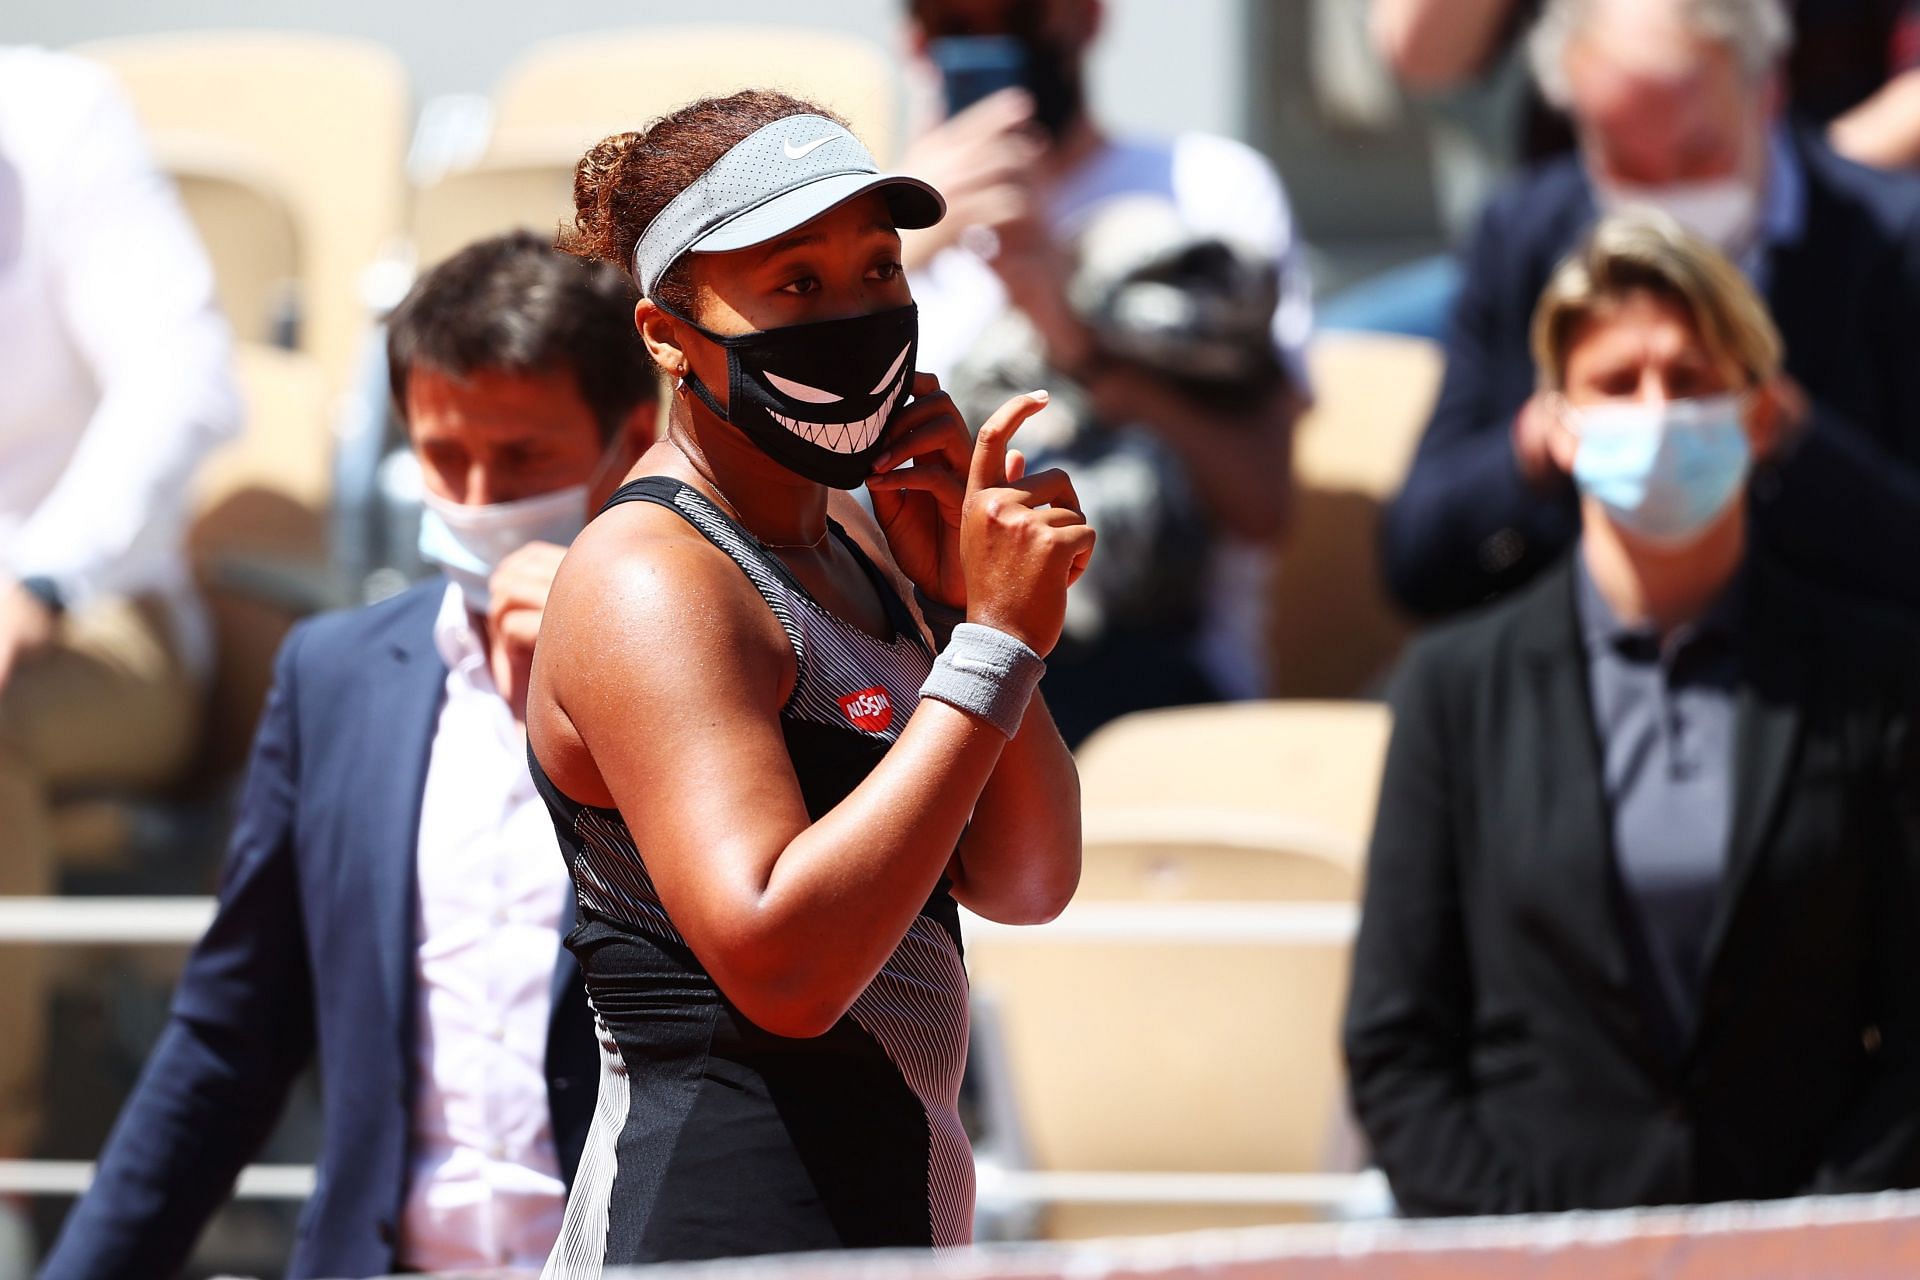 Osaka withdrew from second round of French Open 2021 due to issues with media